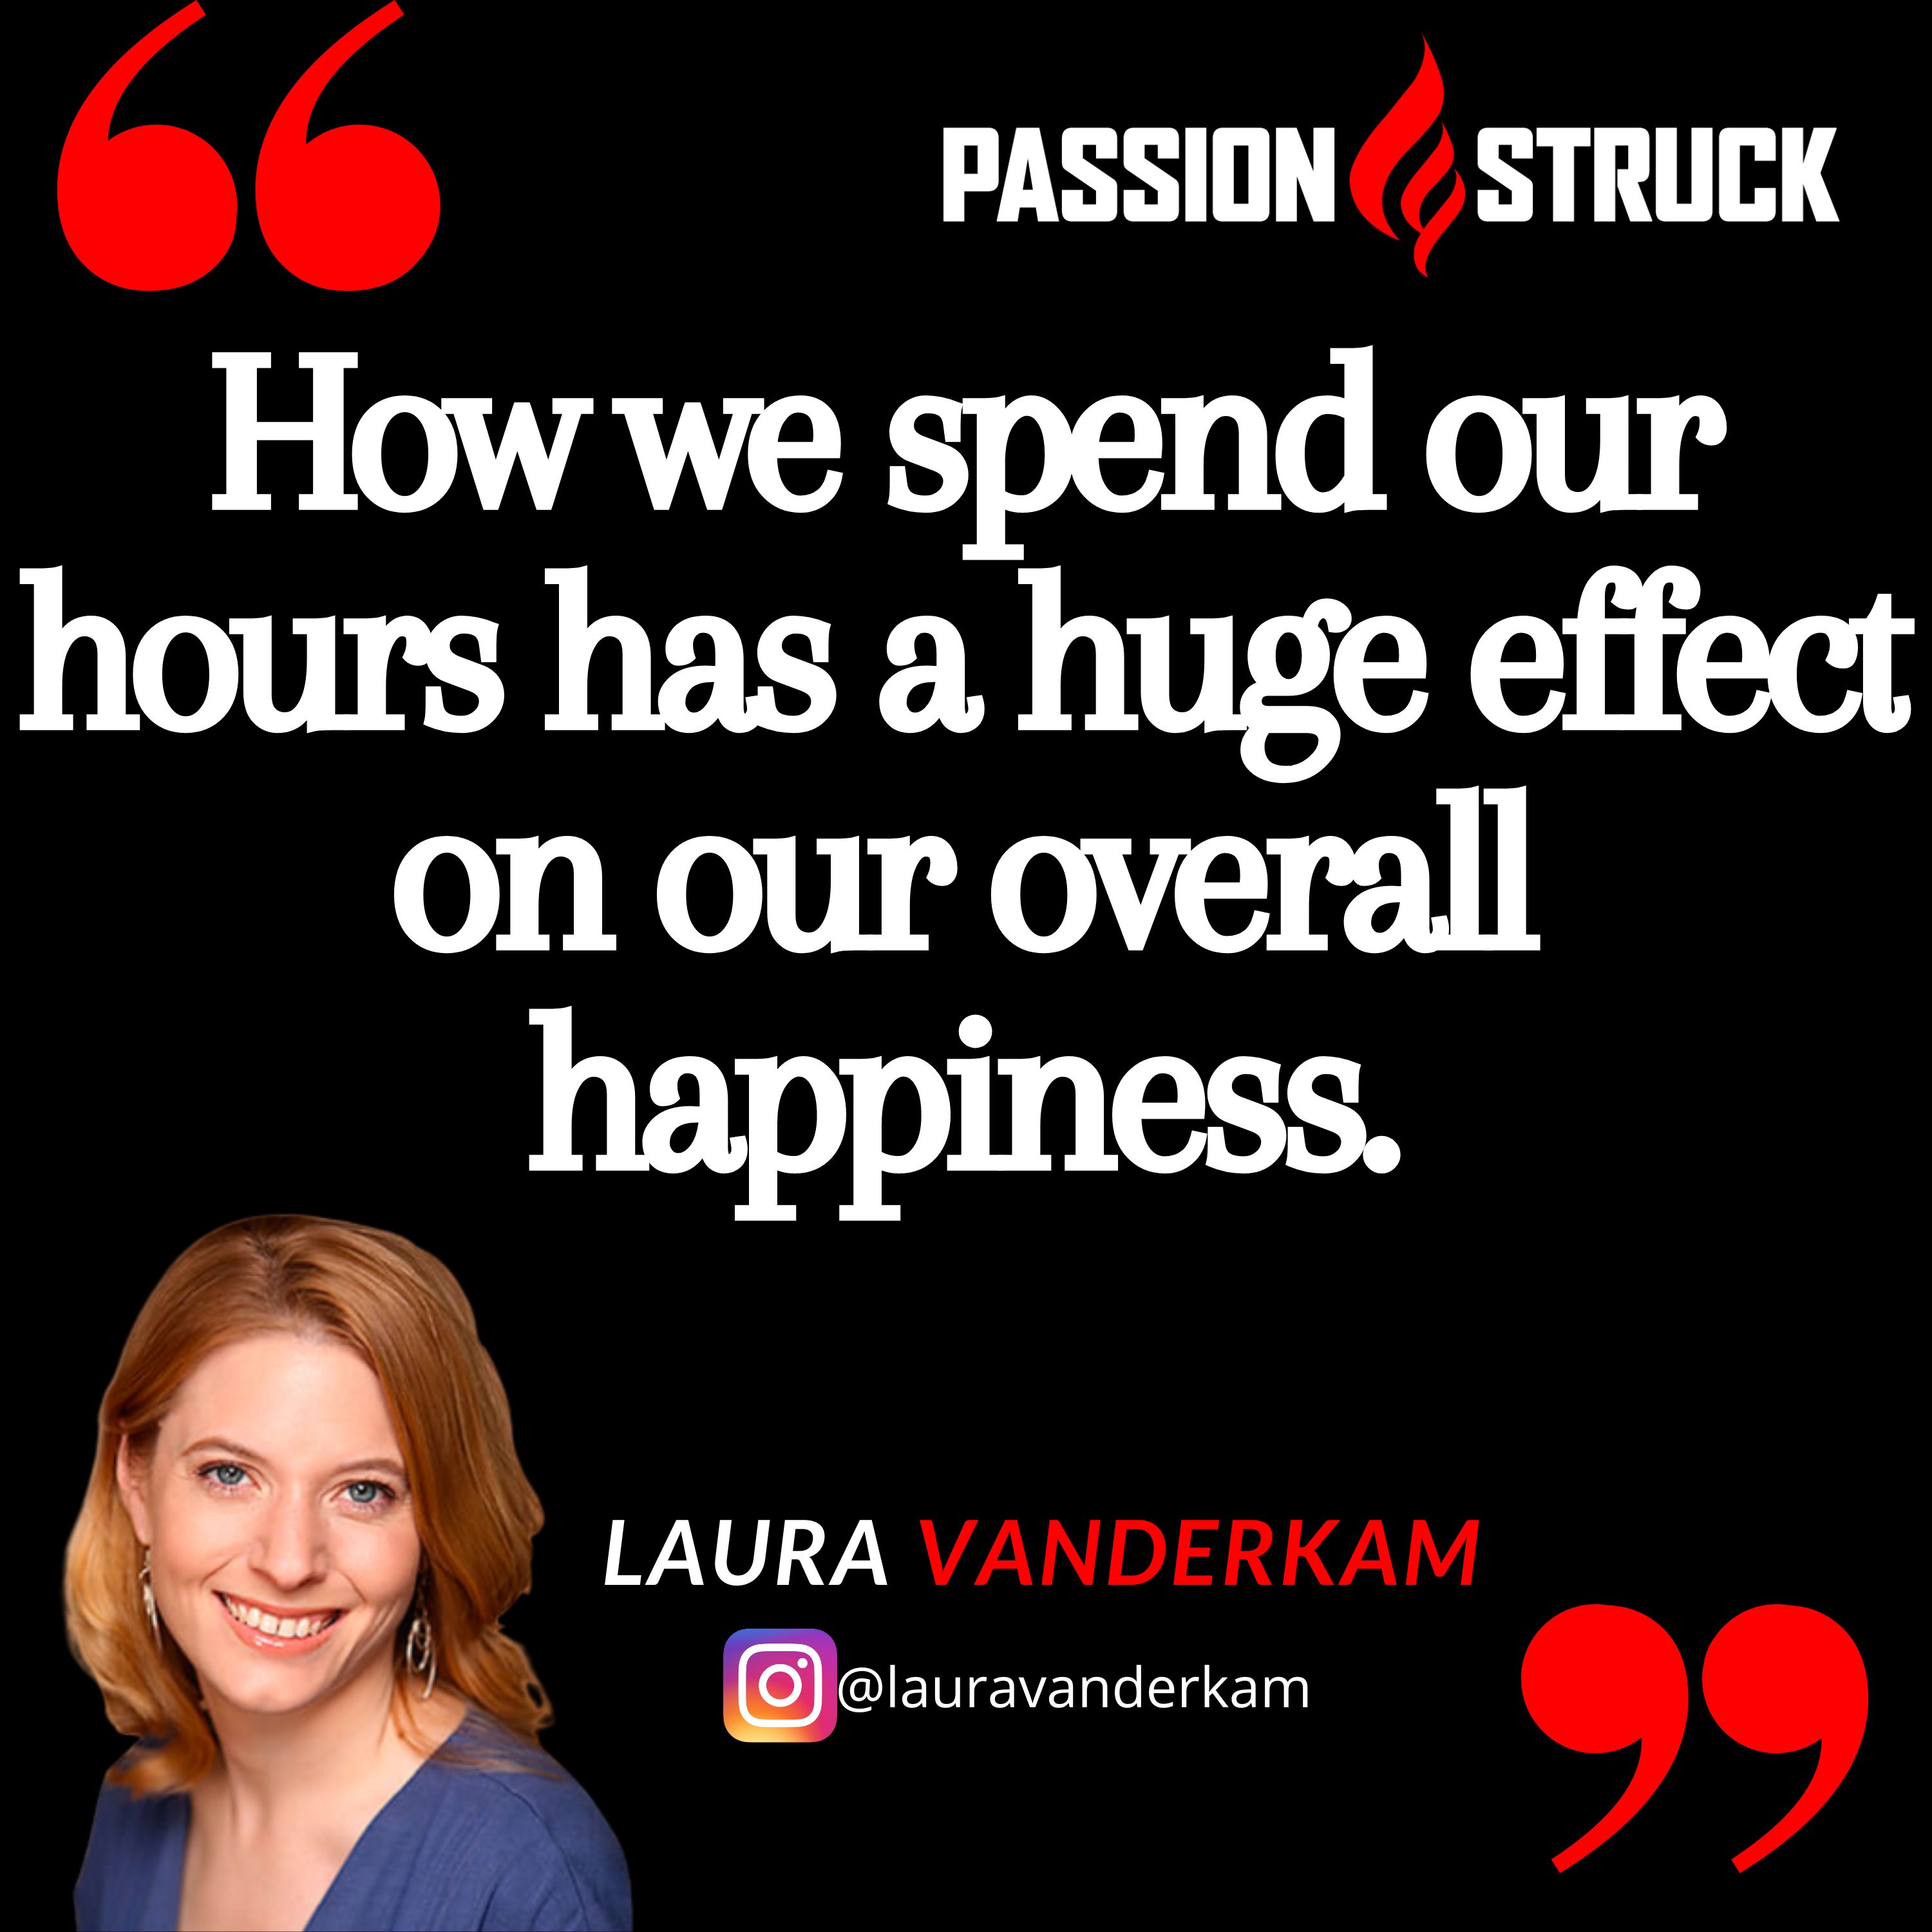 Laura Vanderkam quote from the Passion Struck podcast: How we spend our hours has a huge effect on our overall happiness.